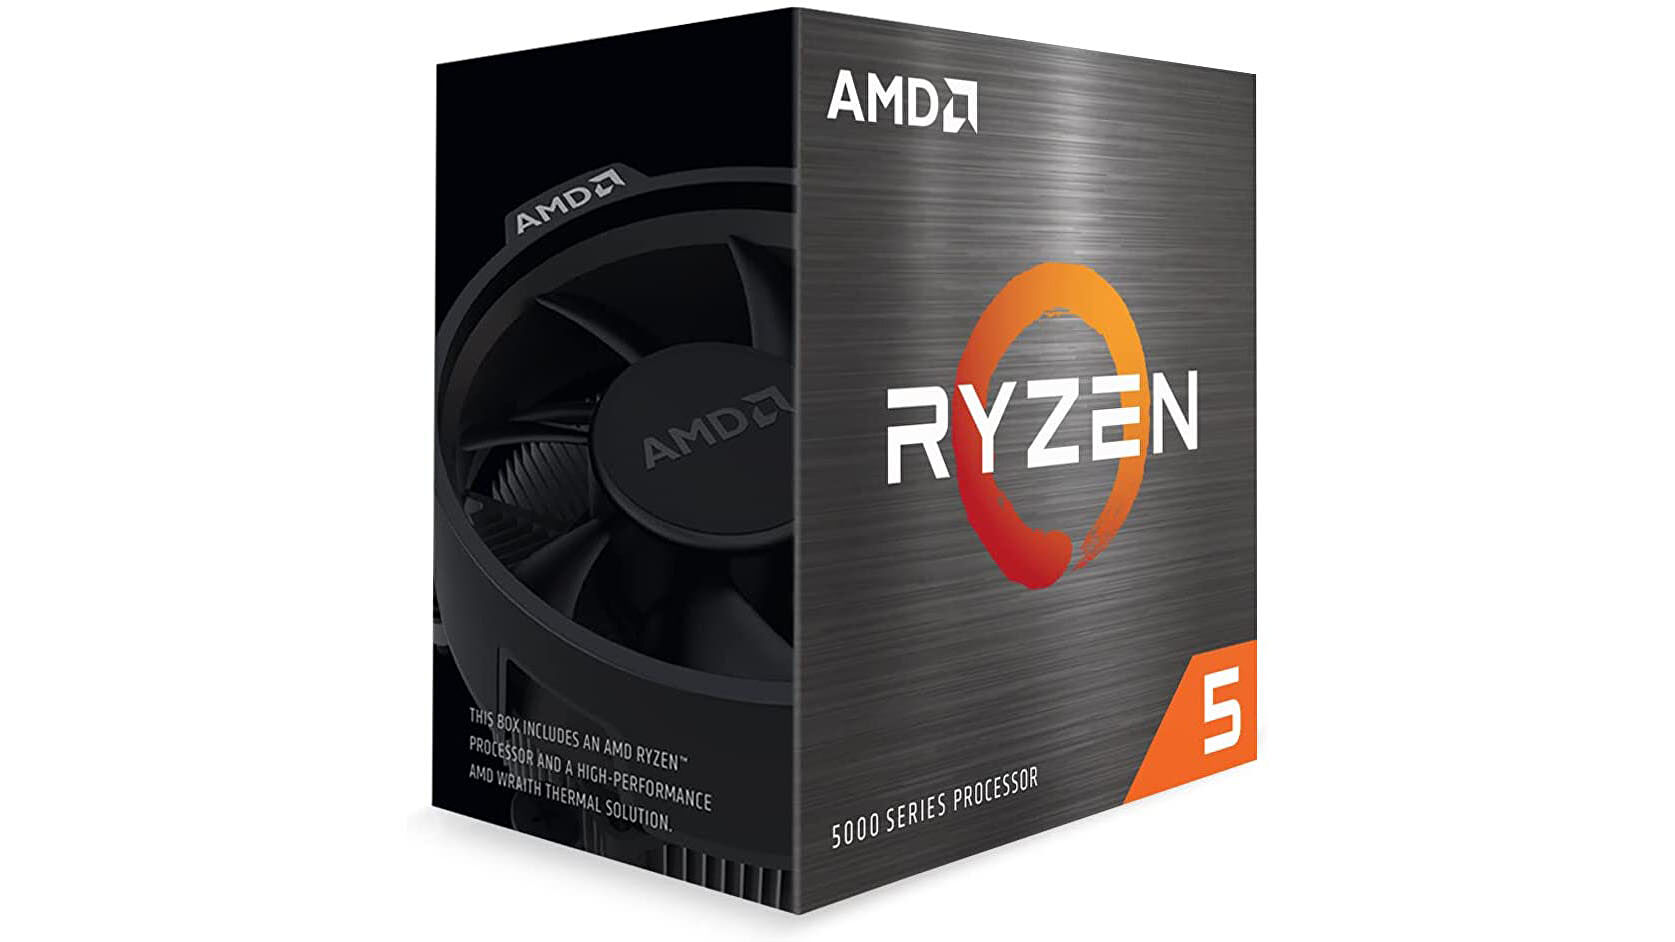 This Ryzen 5000 processor is yours for £145